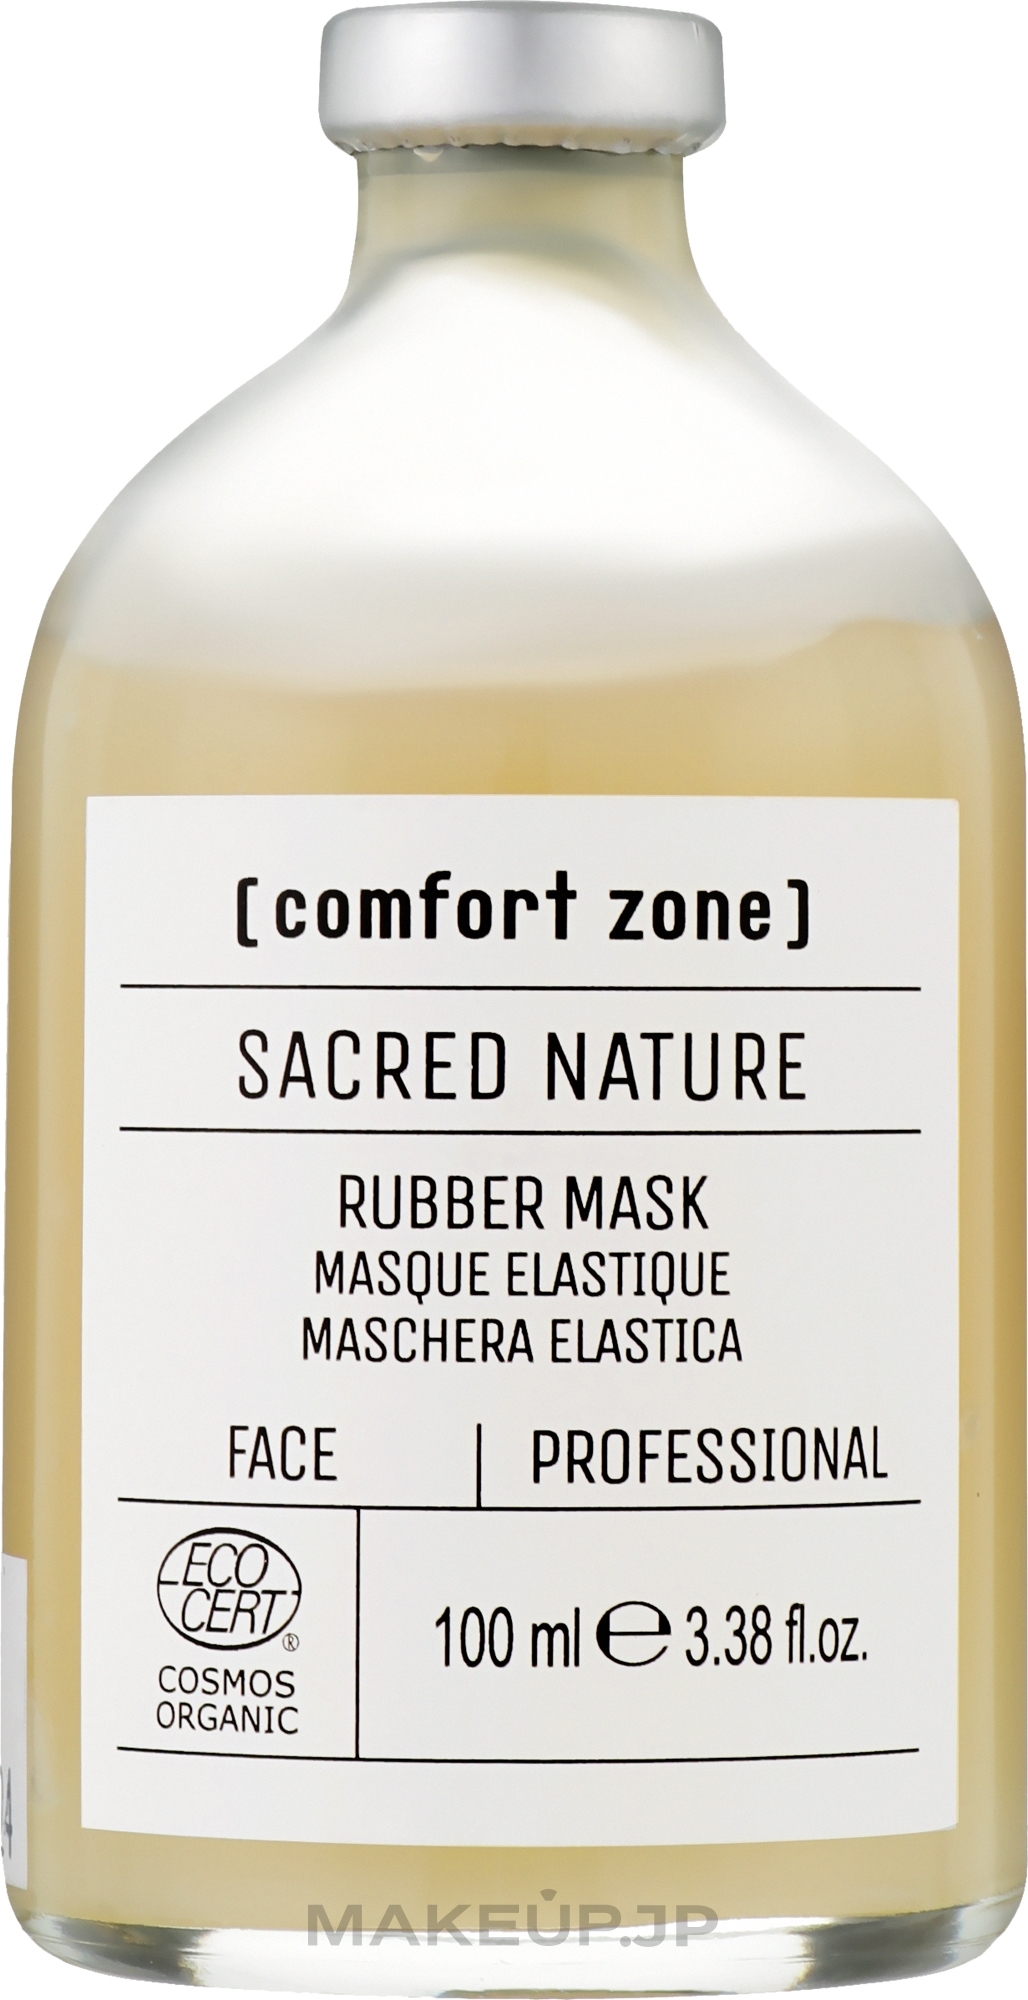 Face Mask - Comfort Zone Sacred Nature Rubber Mask — photo 100 ml